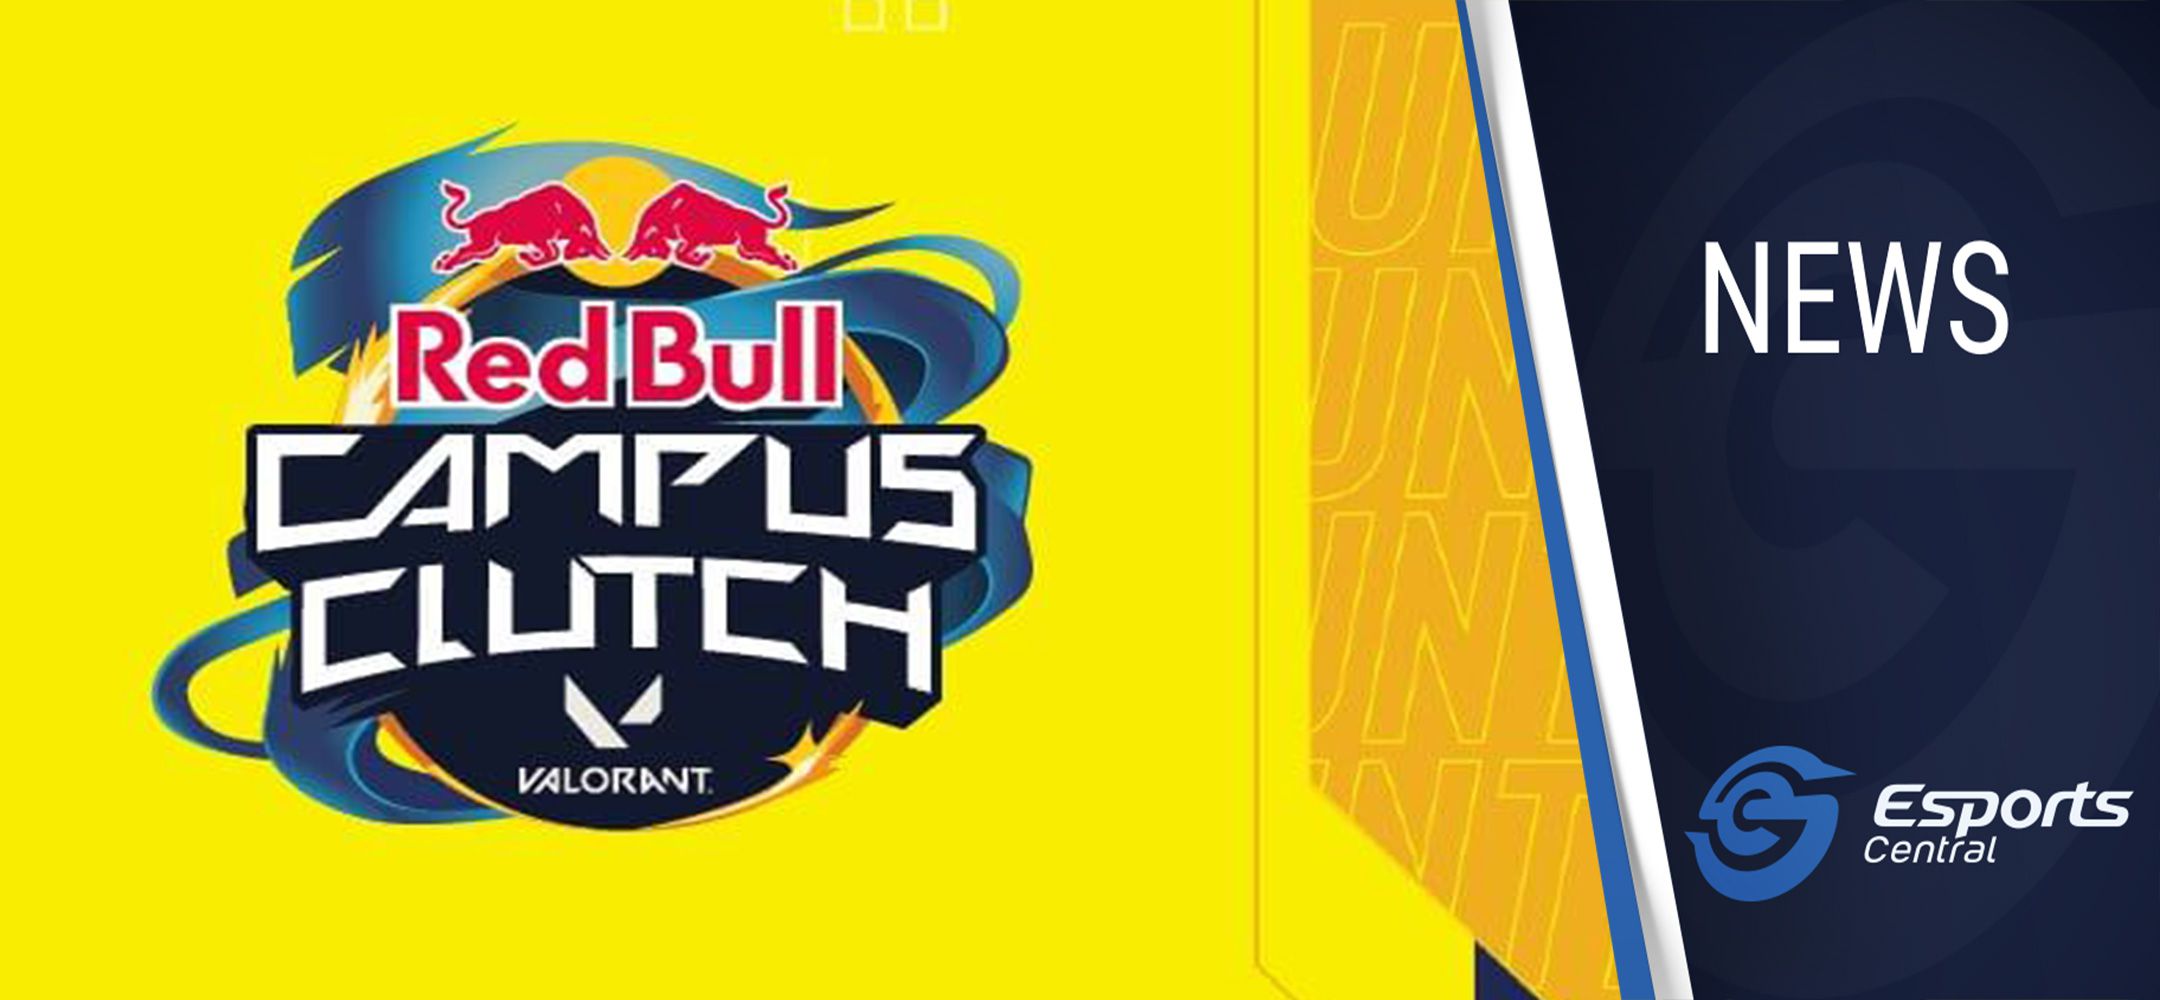 Red Bull Campus Clutch Announced Open To South African University Students Esports Central